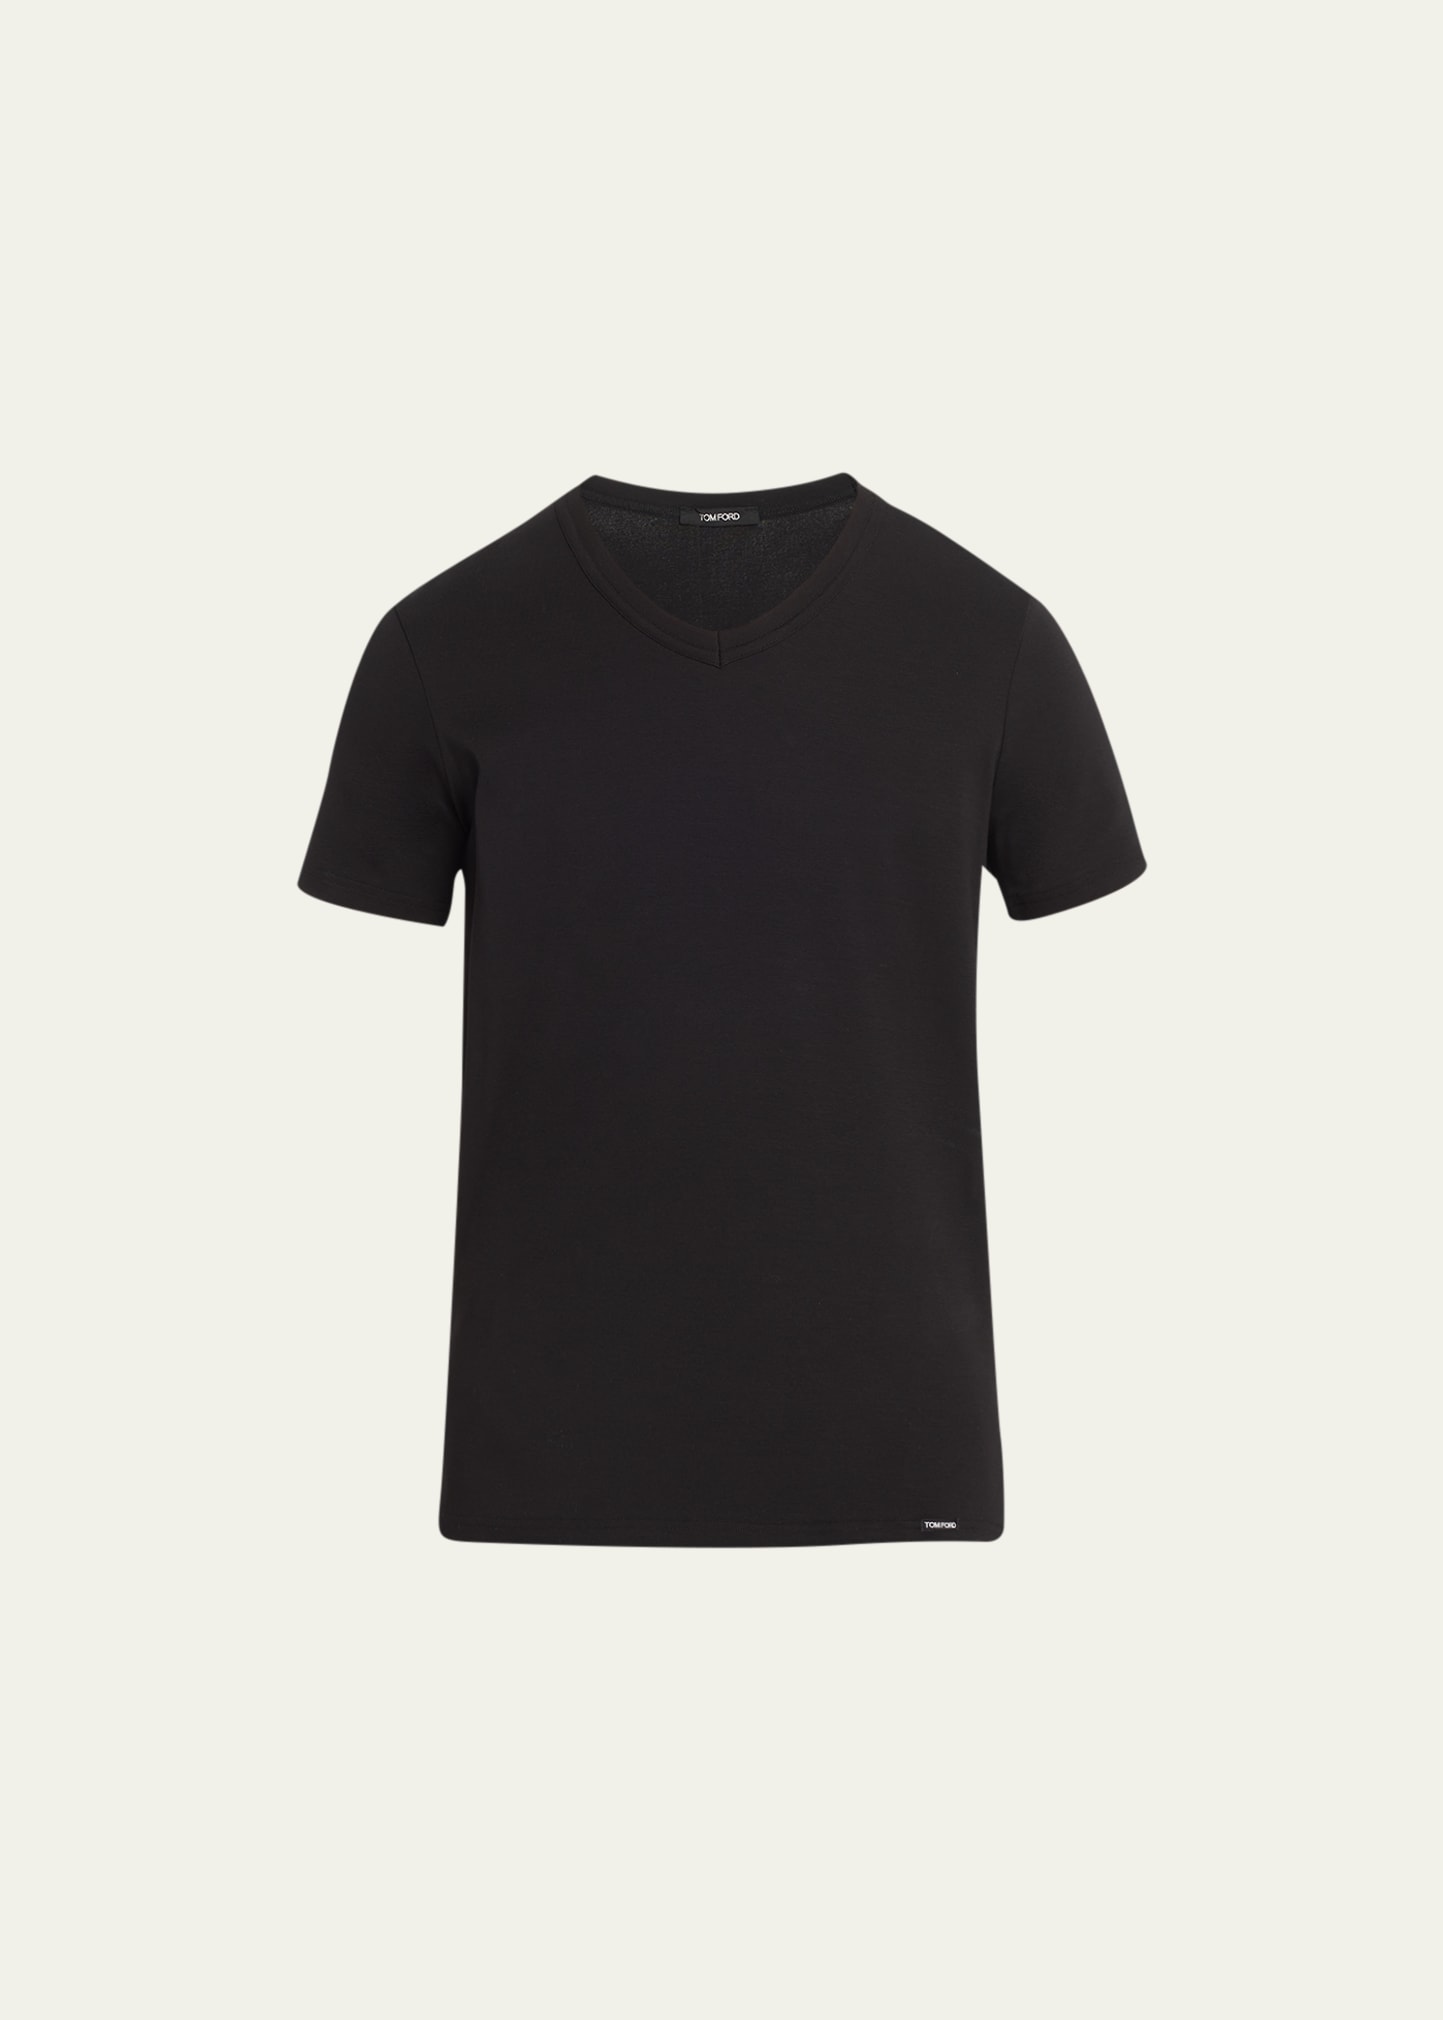 TOM FORD MEN'S COTTON STRETCH JERSEY T-SHIRT